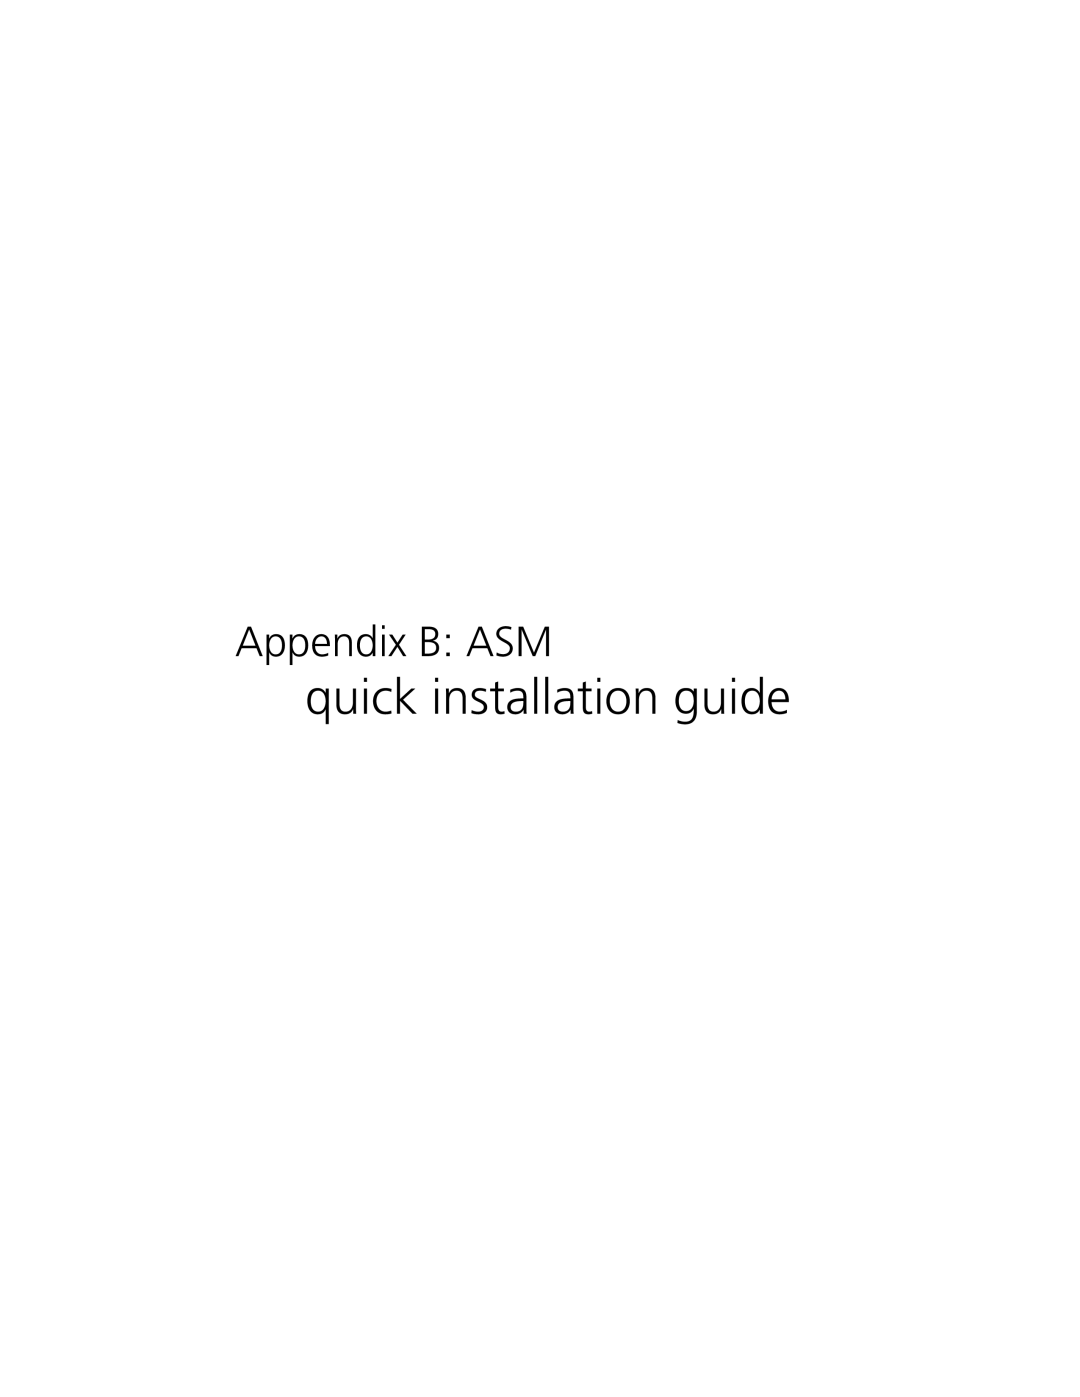 Acer G301 manual quick installation guide, Appendix B ASM 